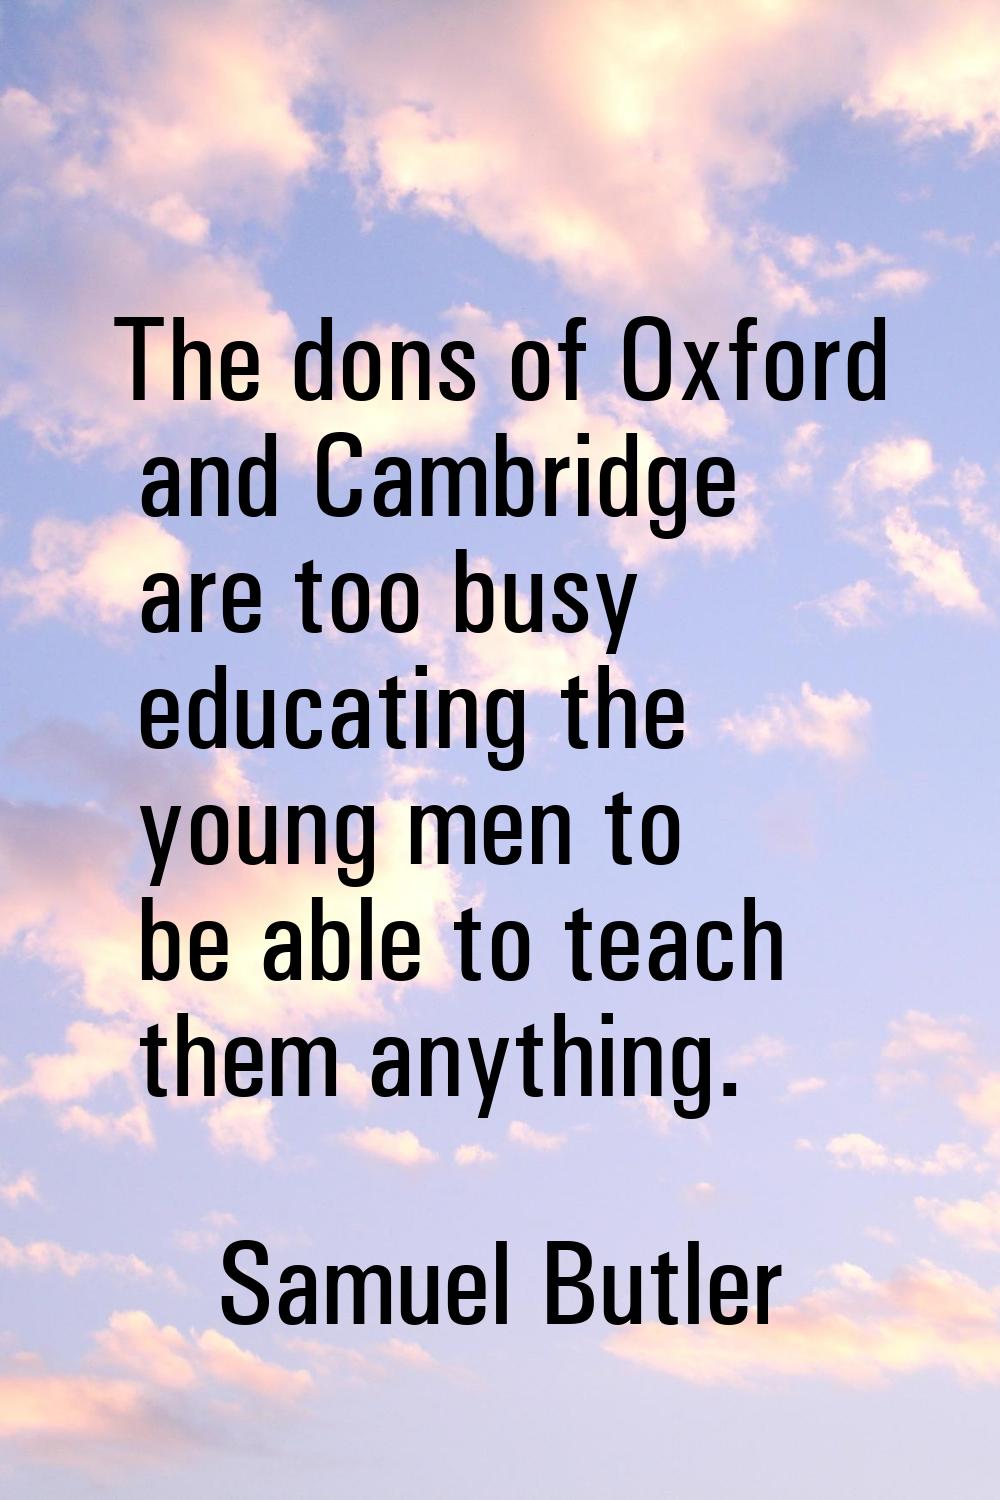 The dons of Oxford and Cambridge are too busy educating the young men to be able to teach them anyt